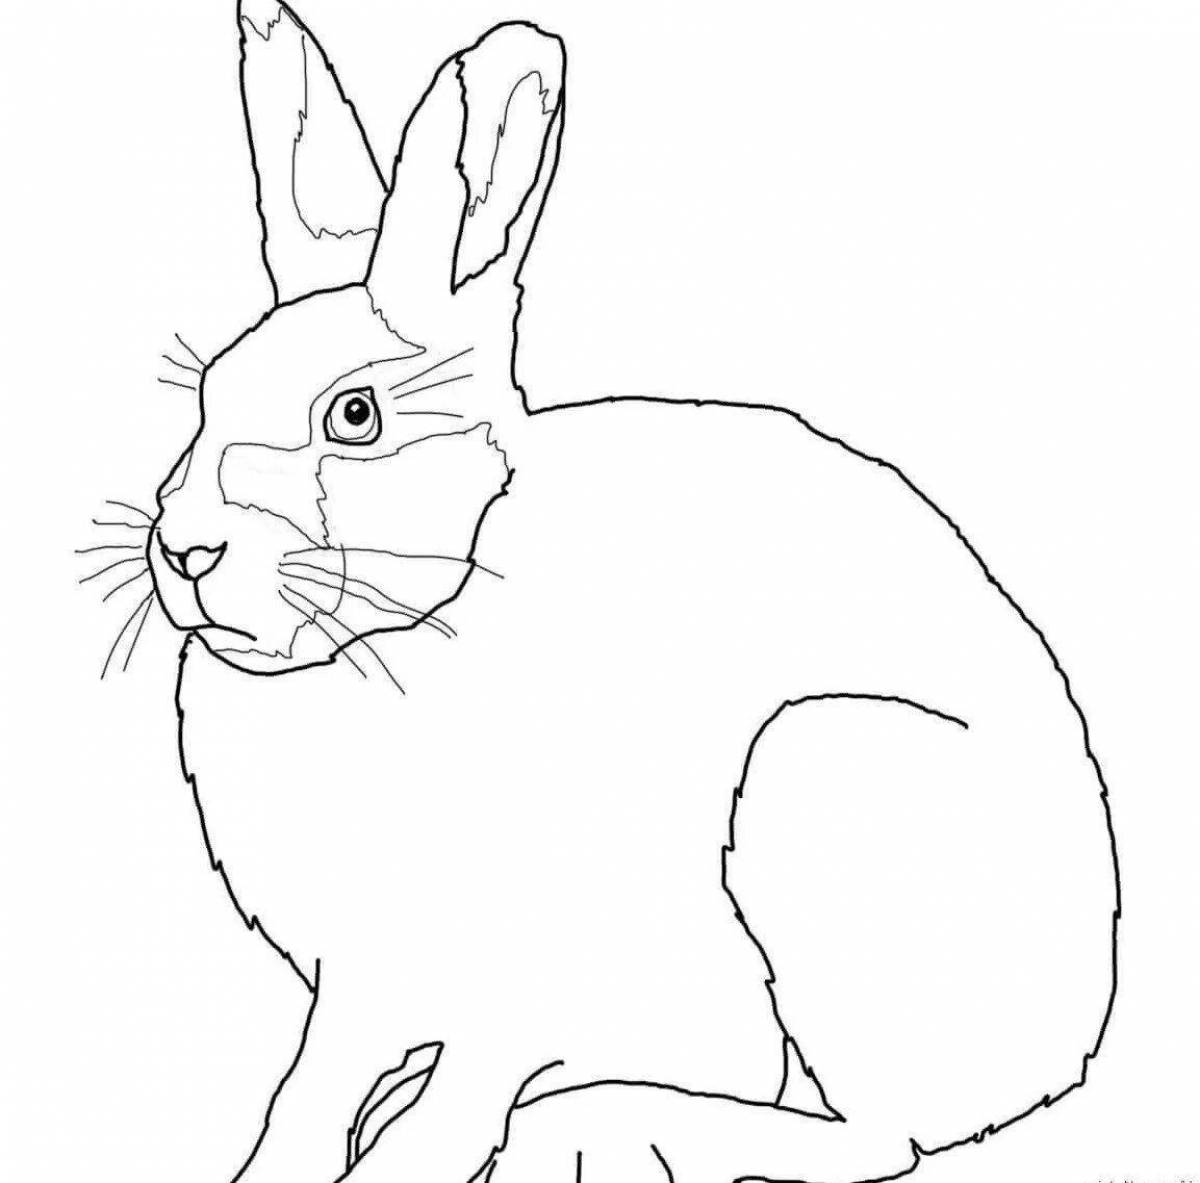 Adorable white hare coloring